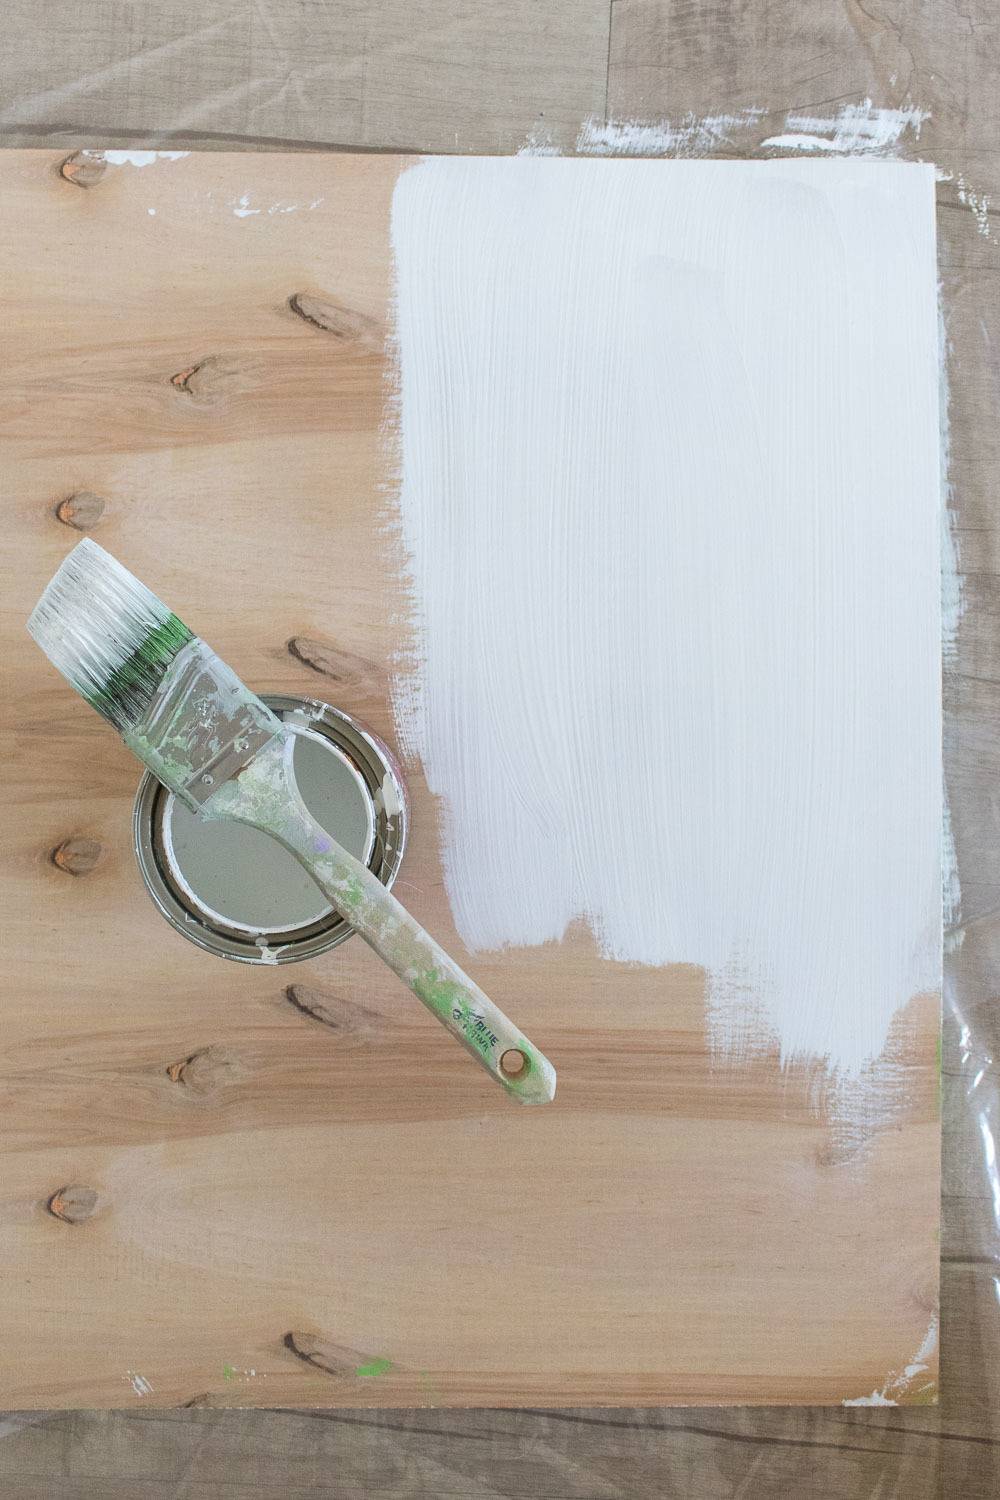 A wooden board that is one fourth painted white